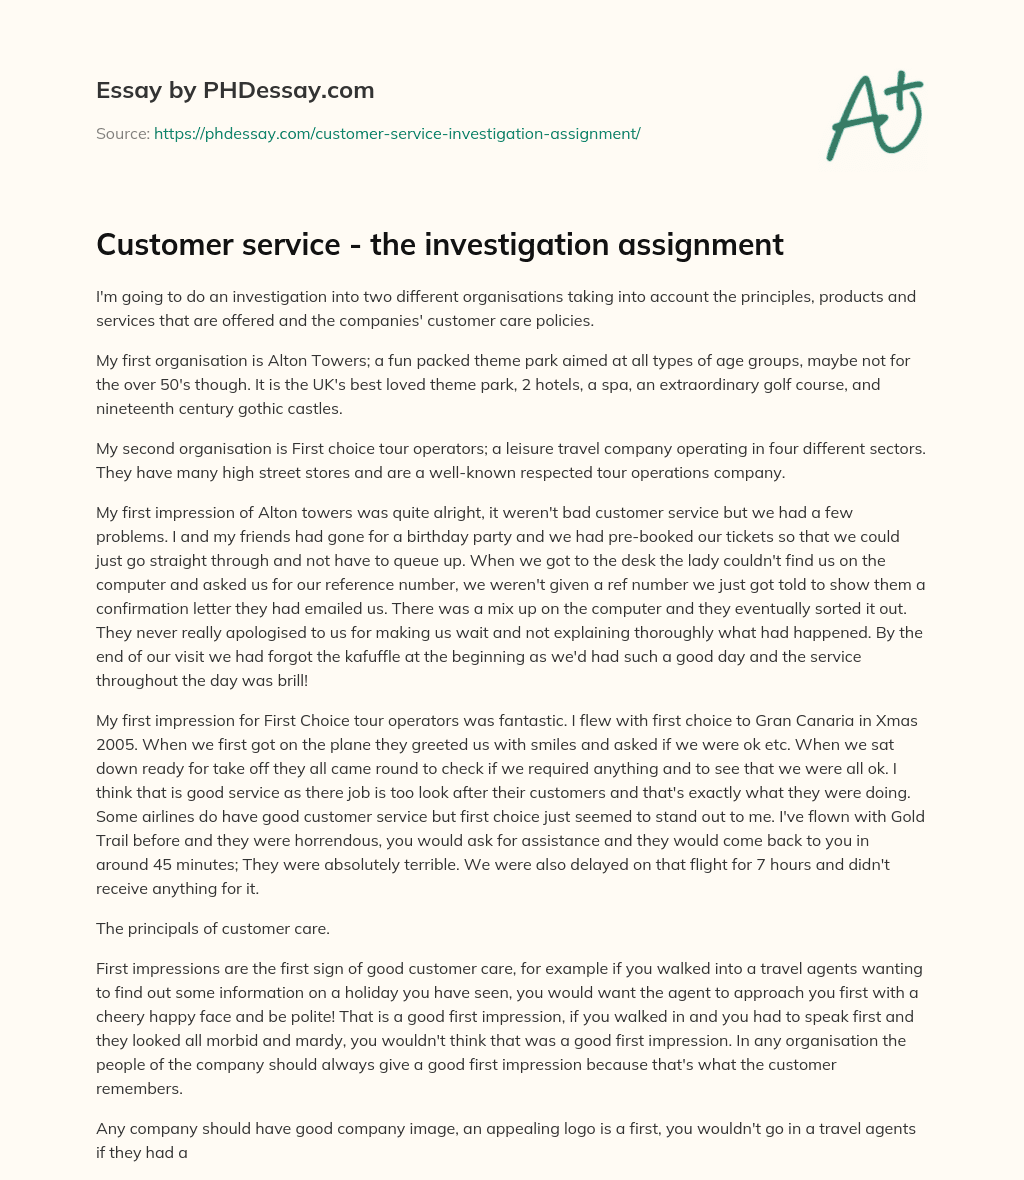 Customer service – the investigation assignment essay